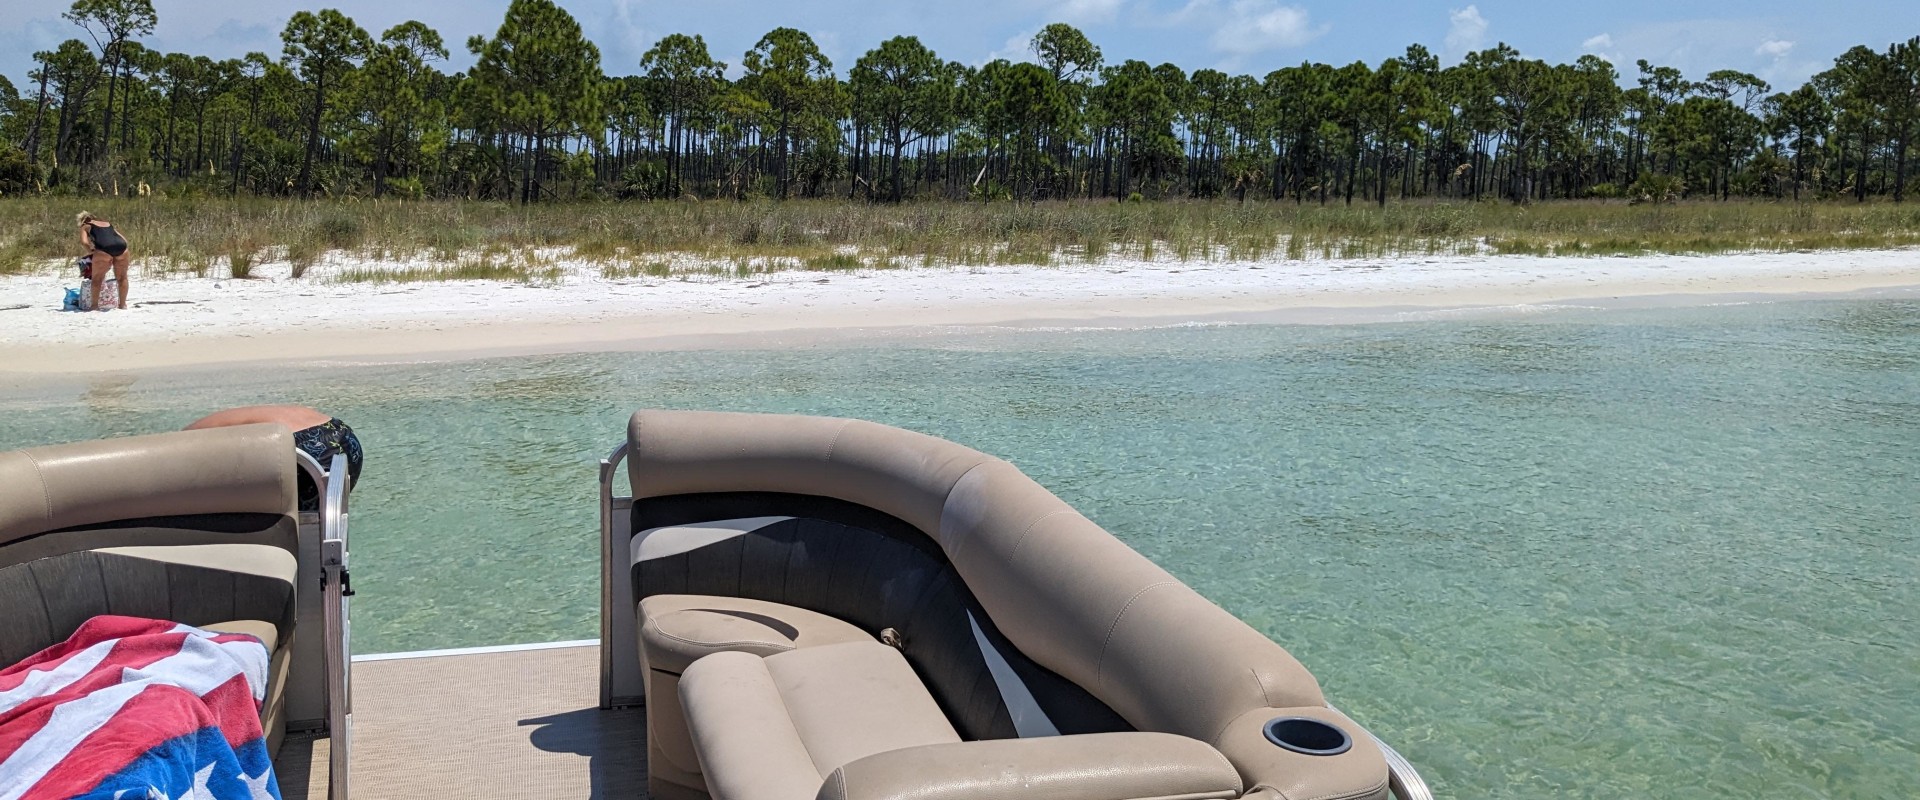 Exploring the Best Fishing Spots with Pontoon Rentals in Panama City, FL